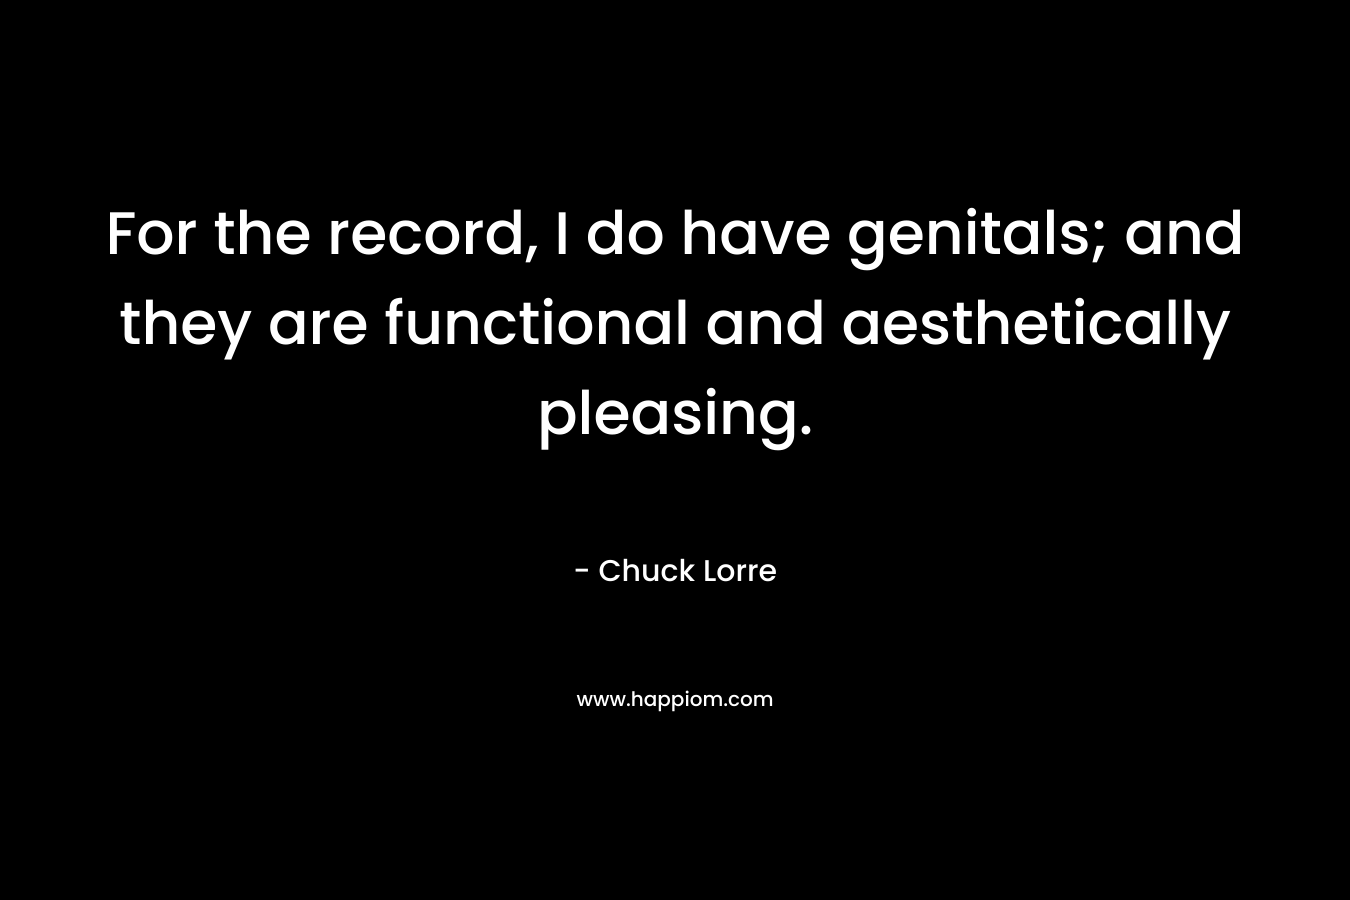 For the record, I do have genitals; and they are functional and aesthetically pleasing. – Chuck Lorre